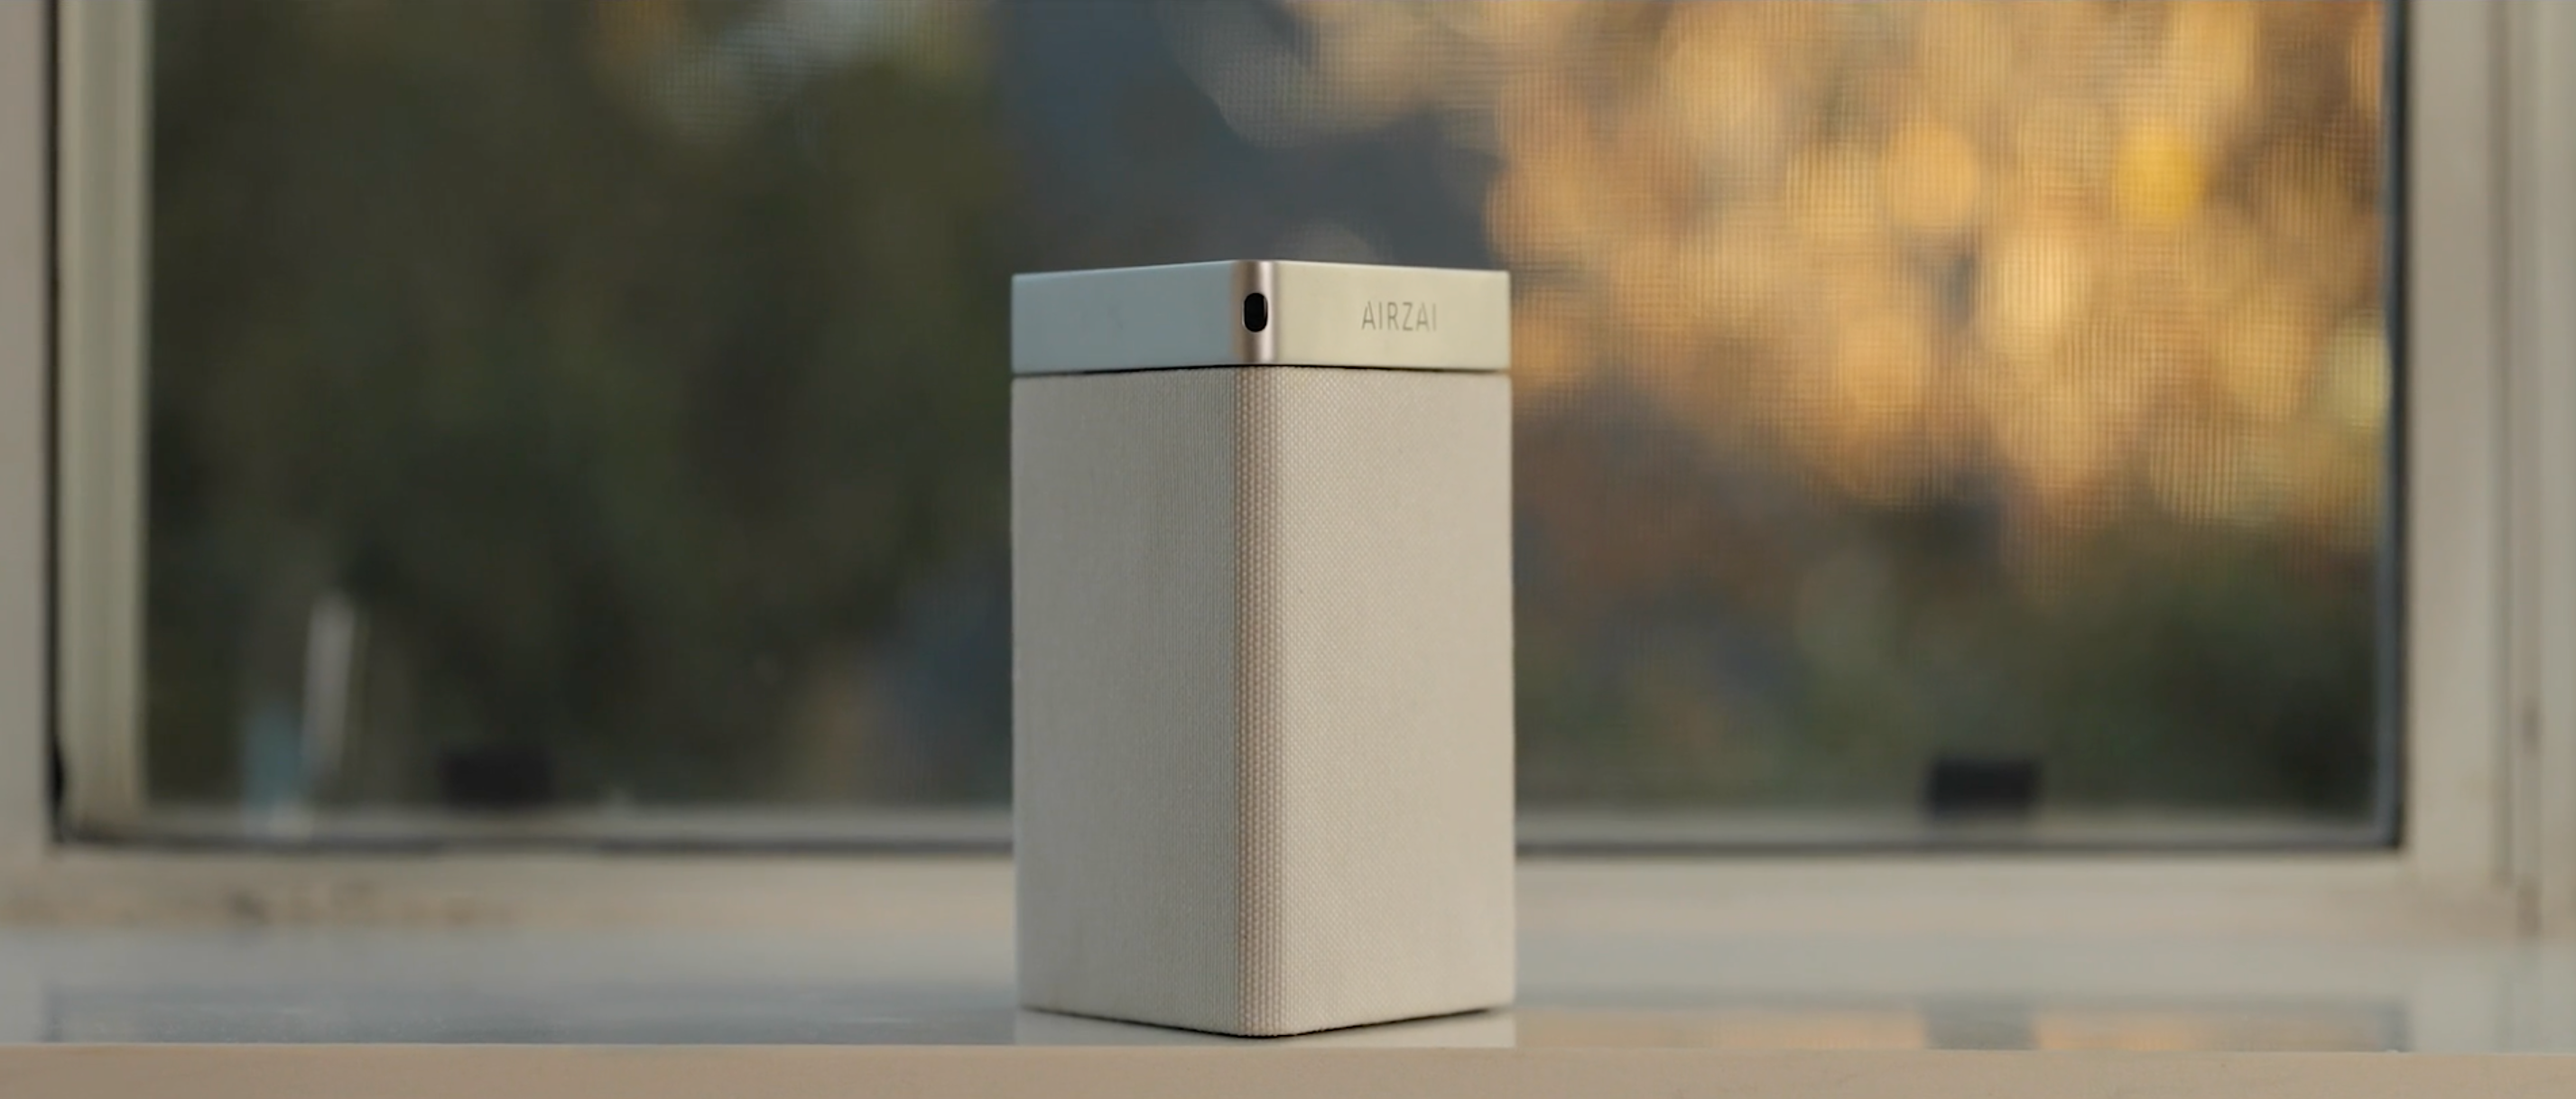 Load video: Airzai is the world&#39;s smartest diffuser. Find out why.